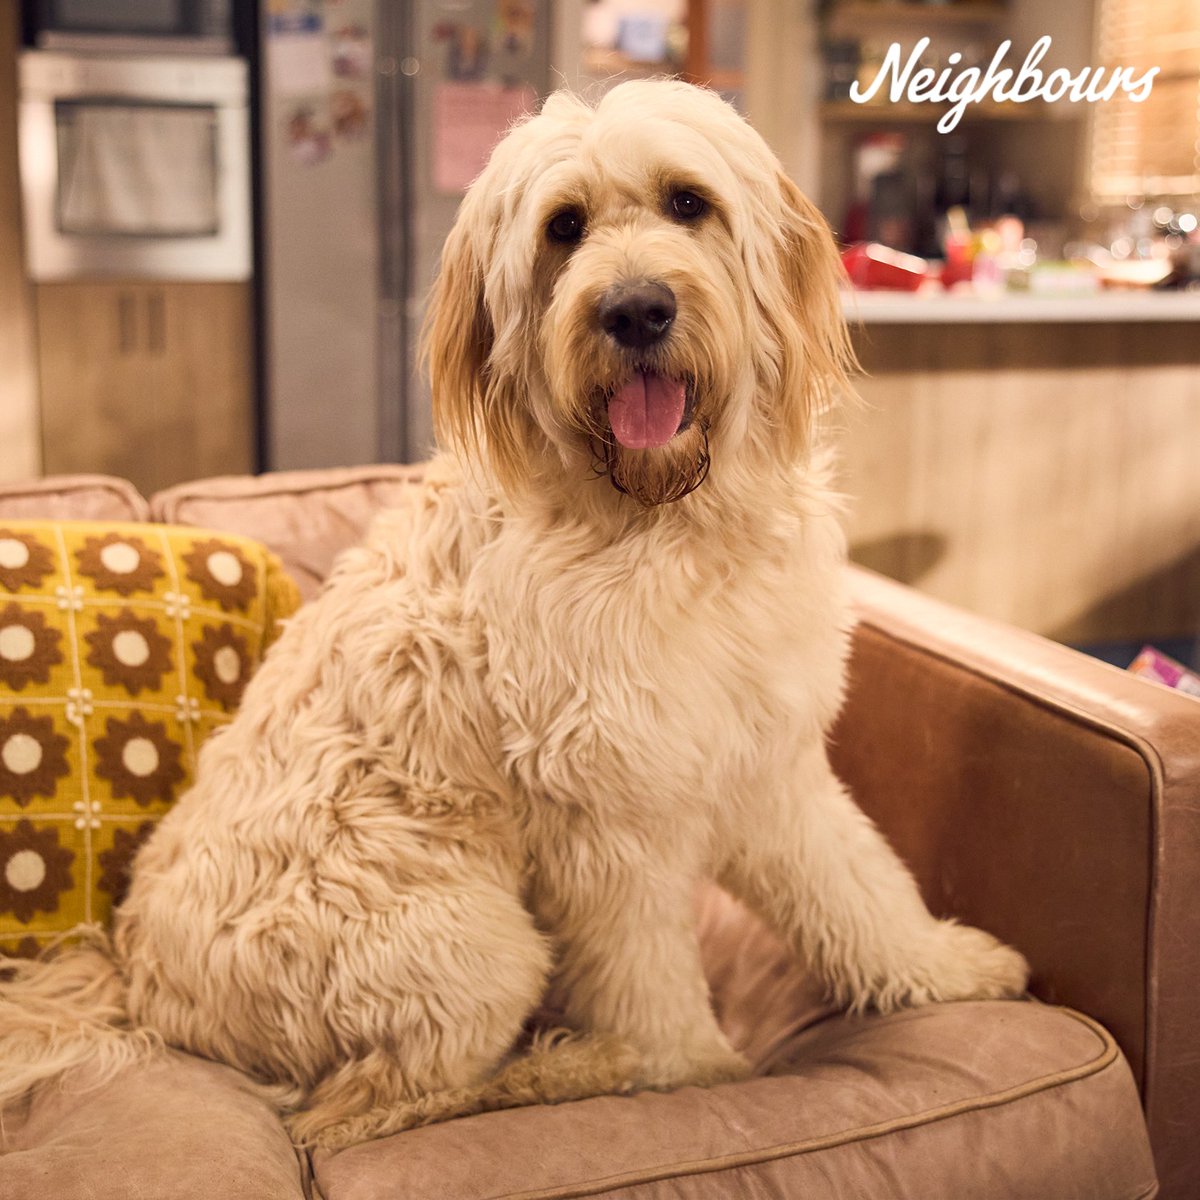 When good neighbours become good FUR-IENDS 🐾 Trevor the dog will make his screen debut when Neighbours returns on September 18th ❤️